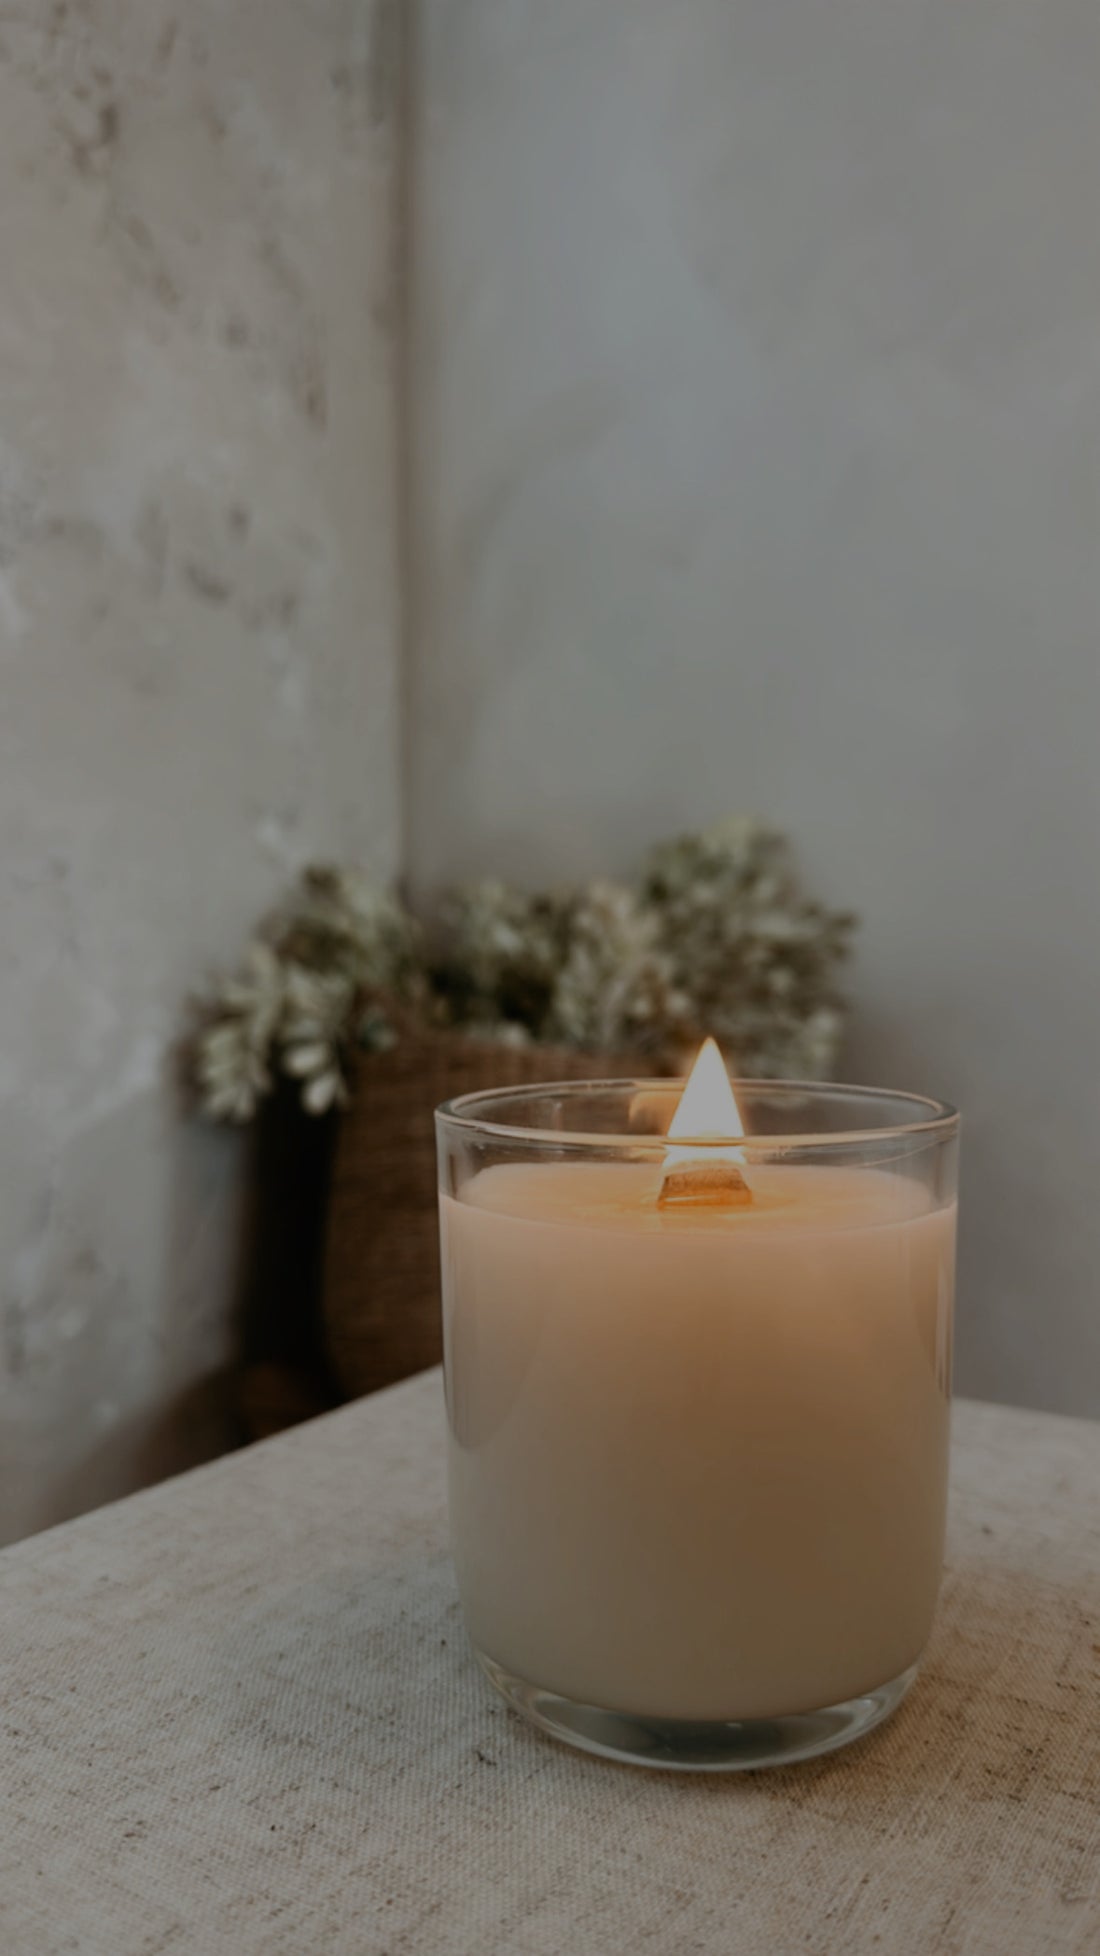 Higher Love Signature Candle